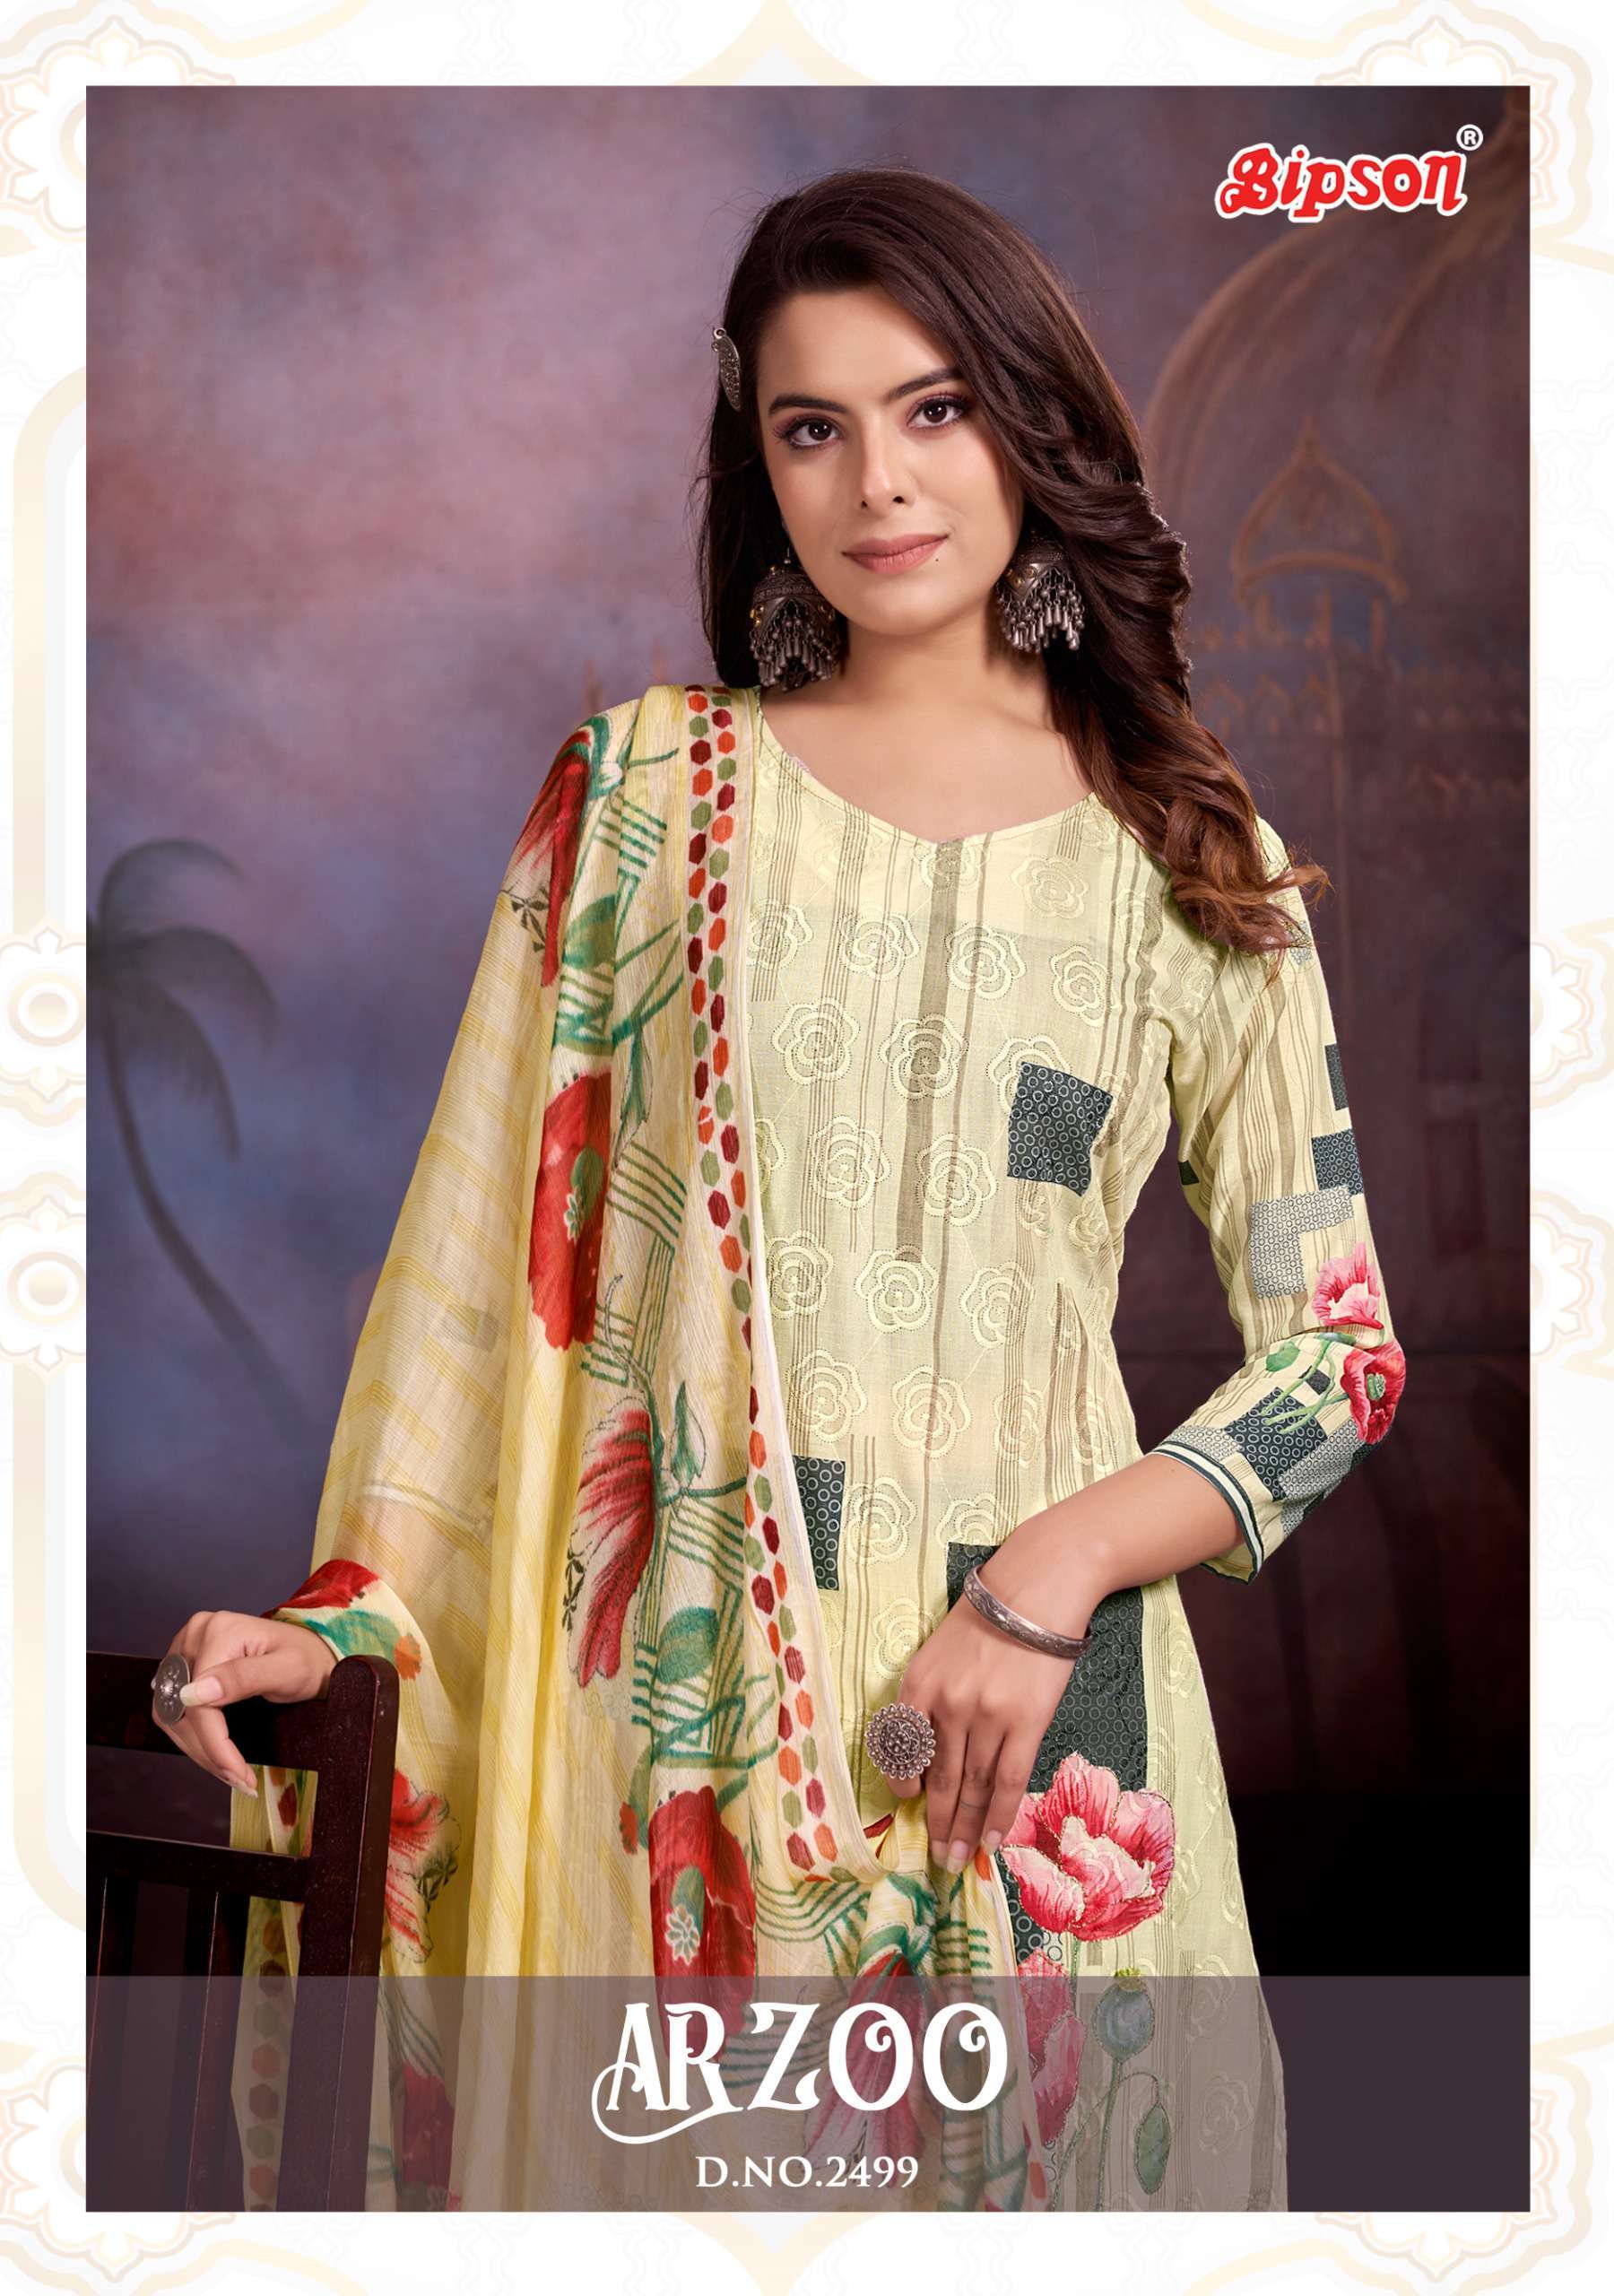 Bipson Arzoo 2499 Exclusive Cotton Salwar Suit New Collection